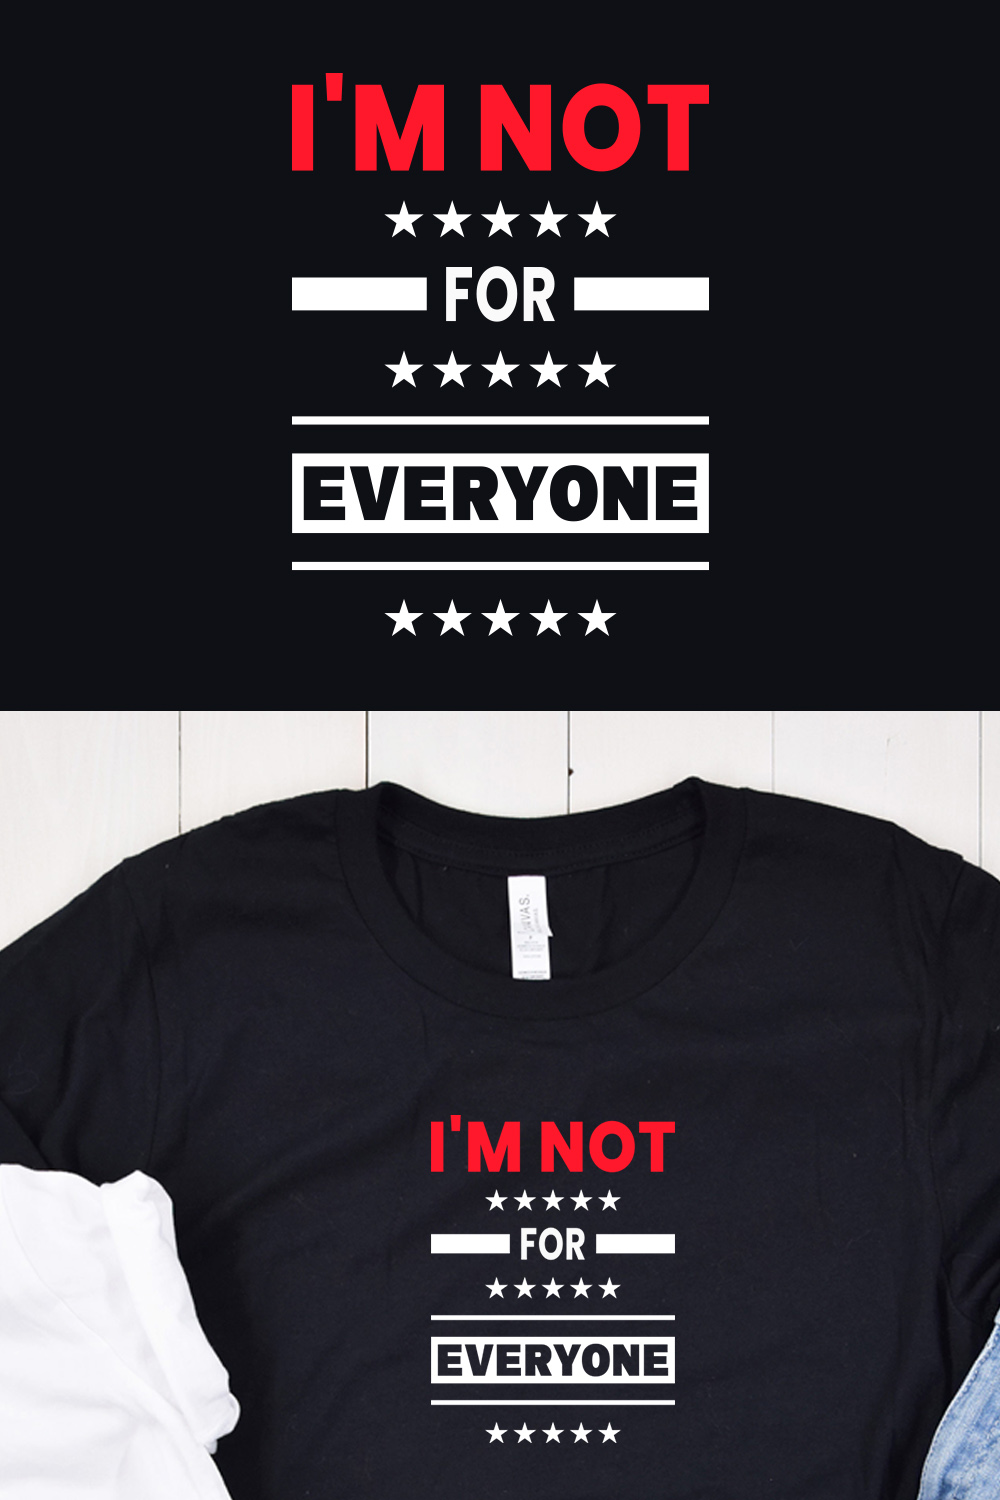 I'm Not for Everyone Typography T-Shirt Design Pinterest image.